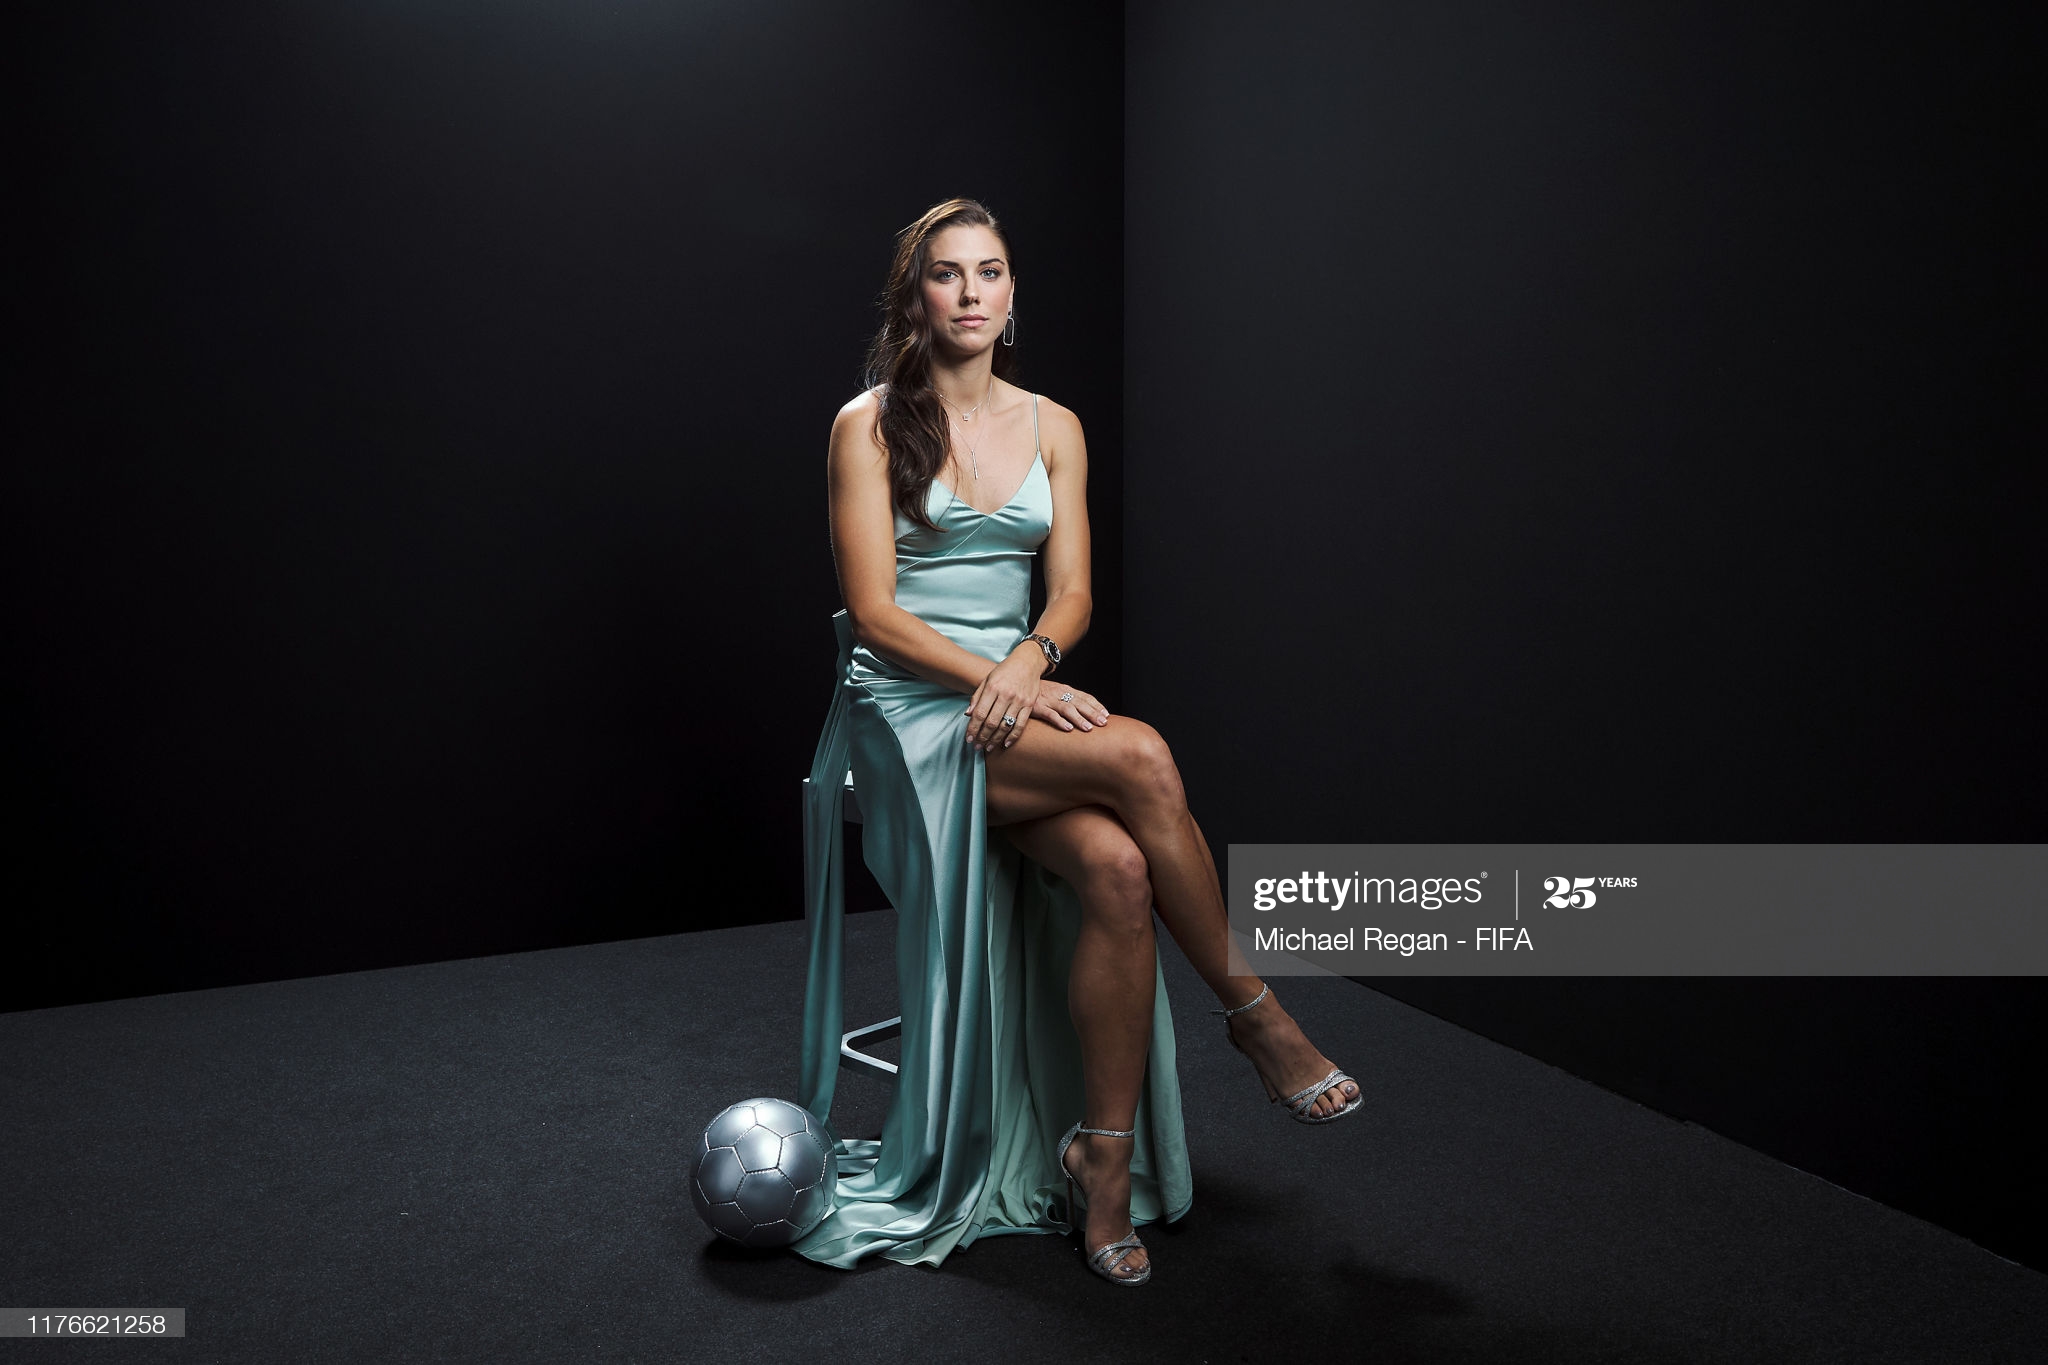 gettyimages-1176621258-2048x2048.jpg